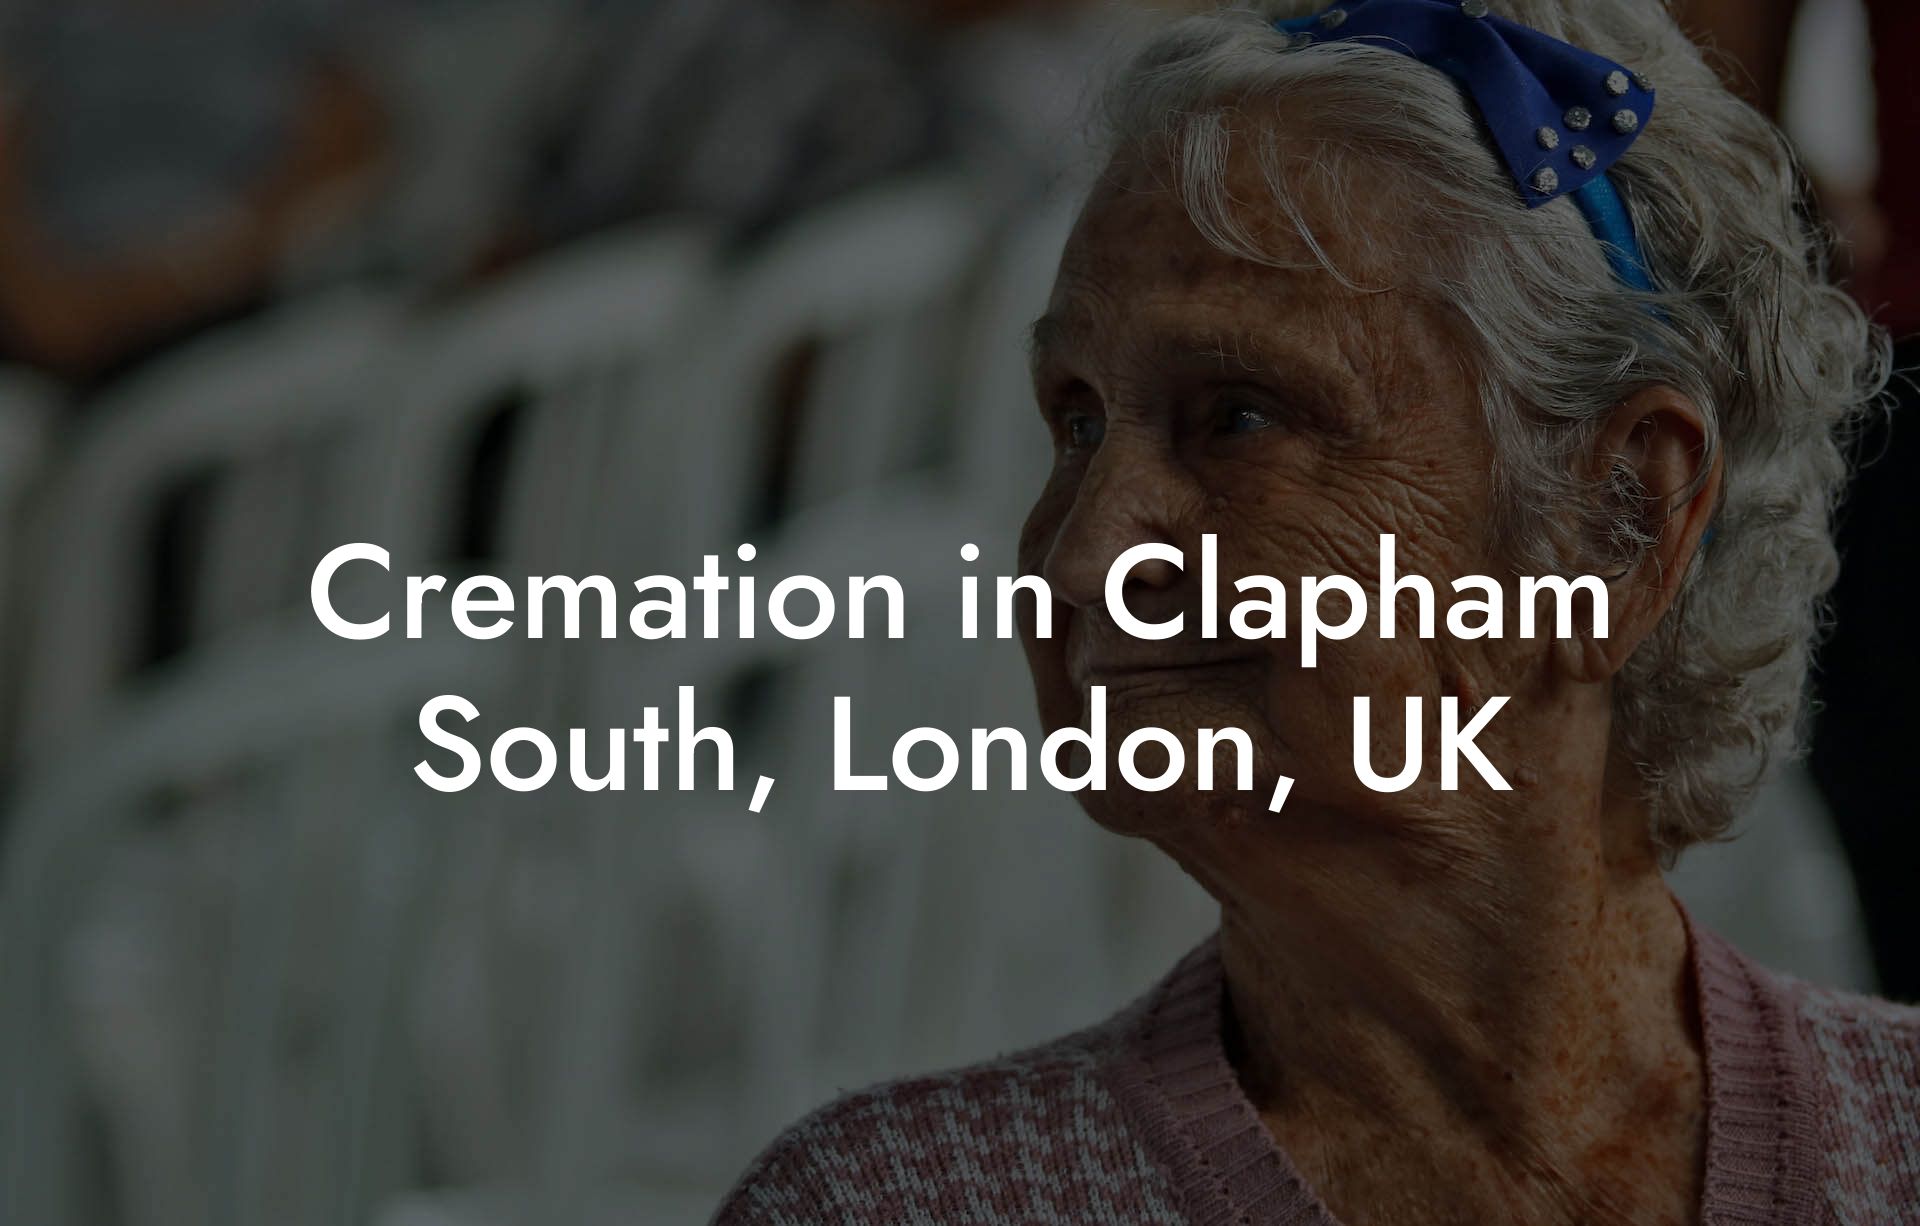 Cremation in Clapham South, London, UK